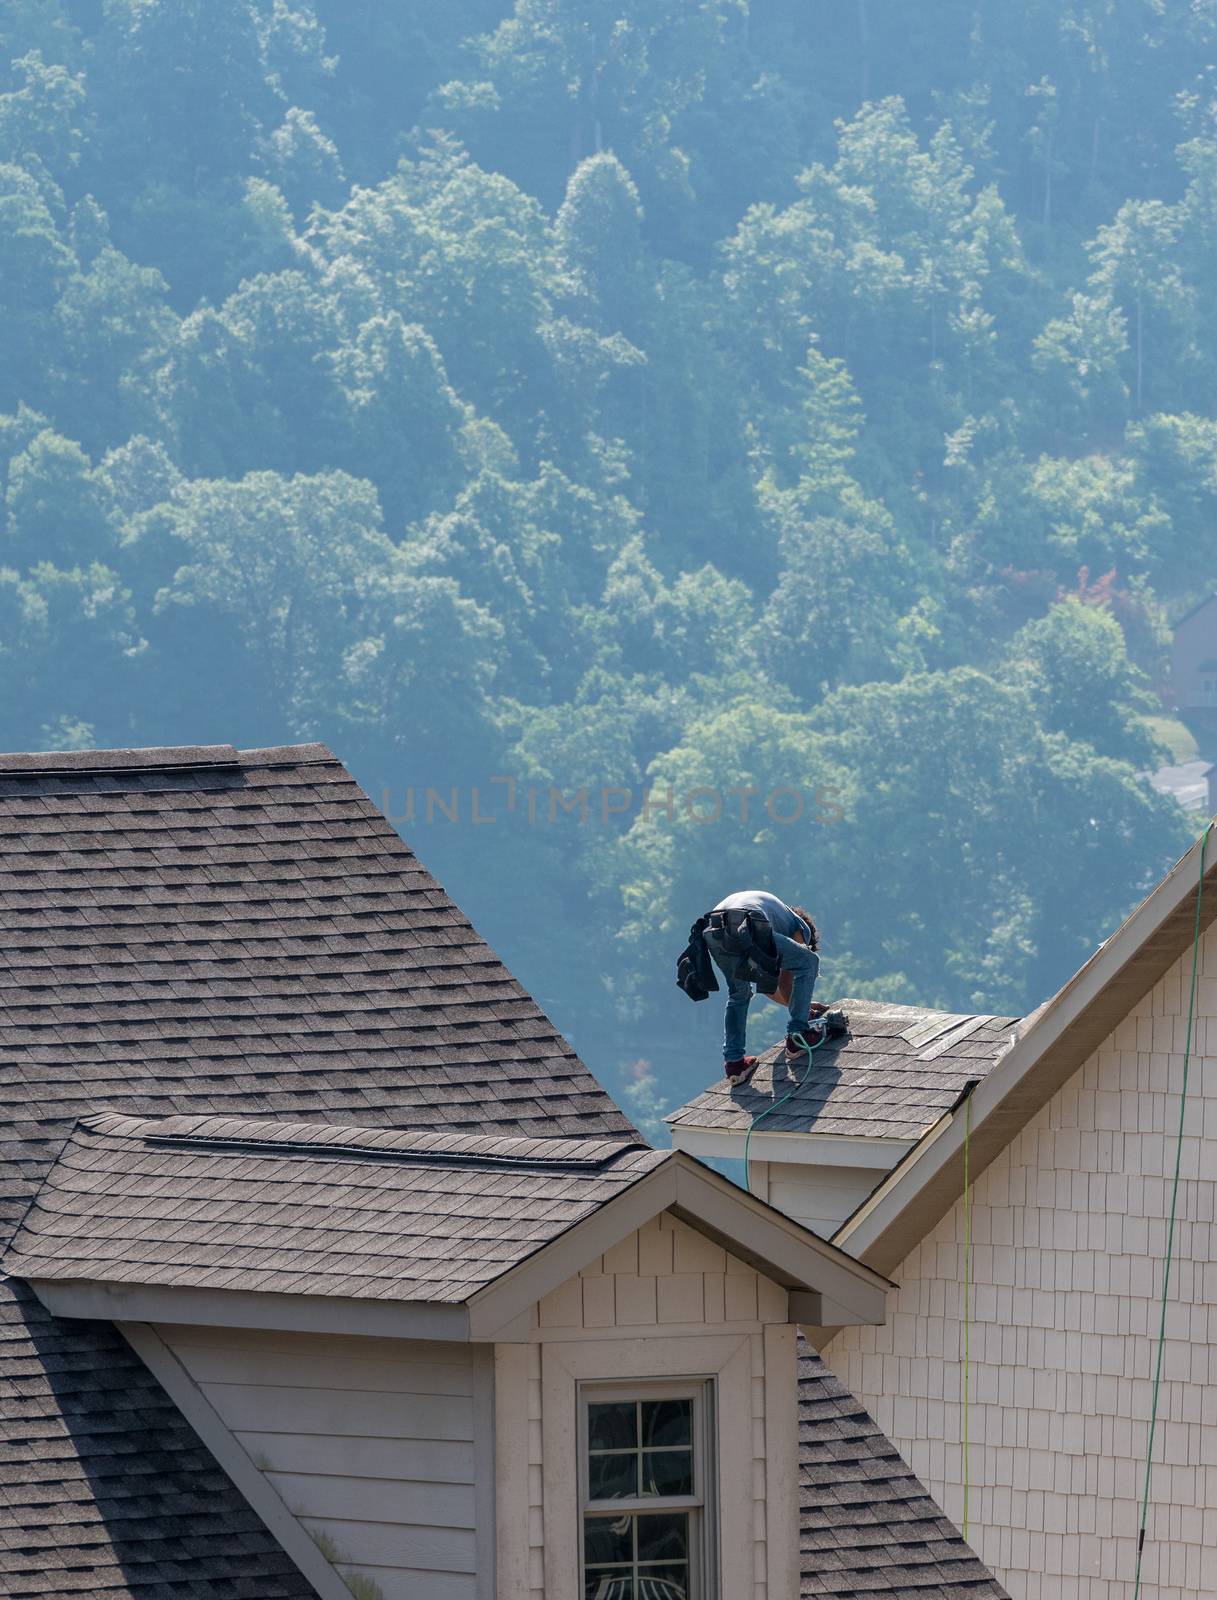 Young roofing contractor nailing shingles on a roof high above the ground by steheap